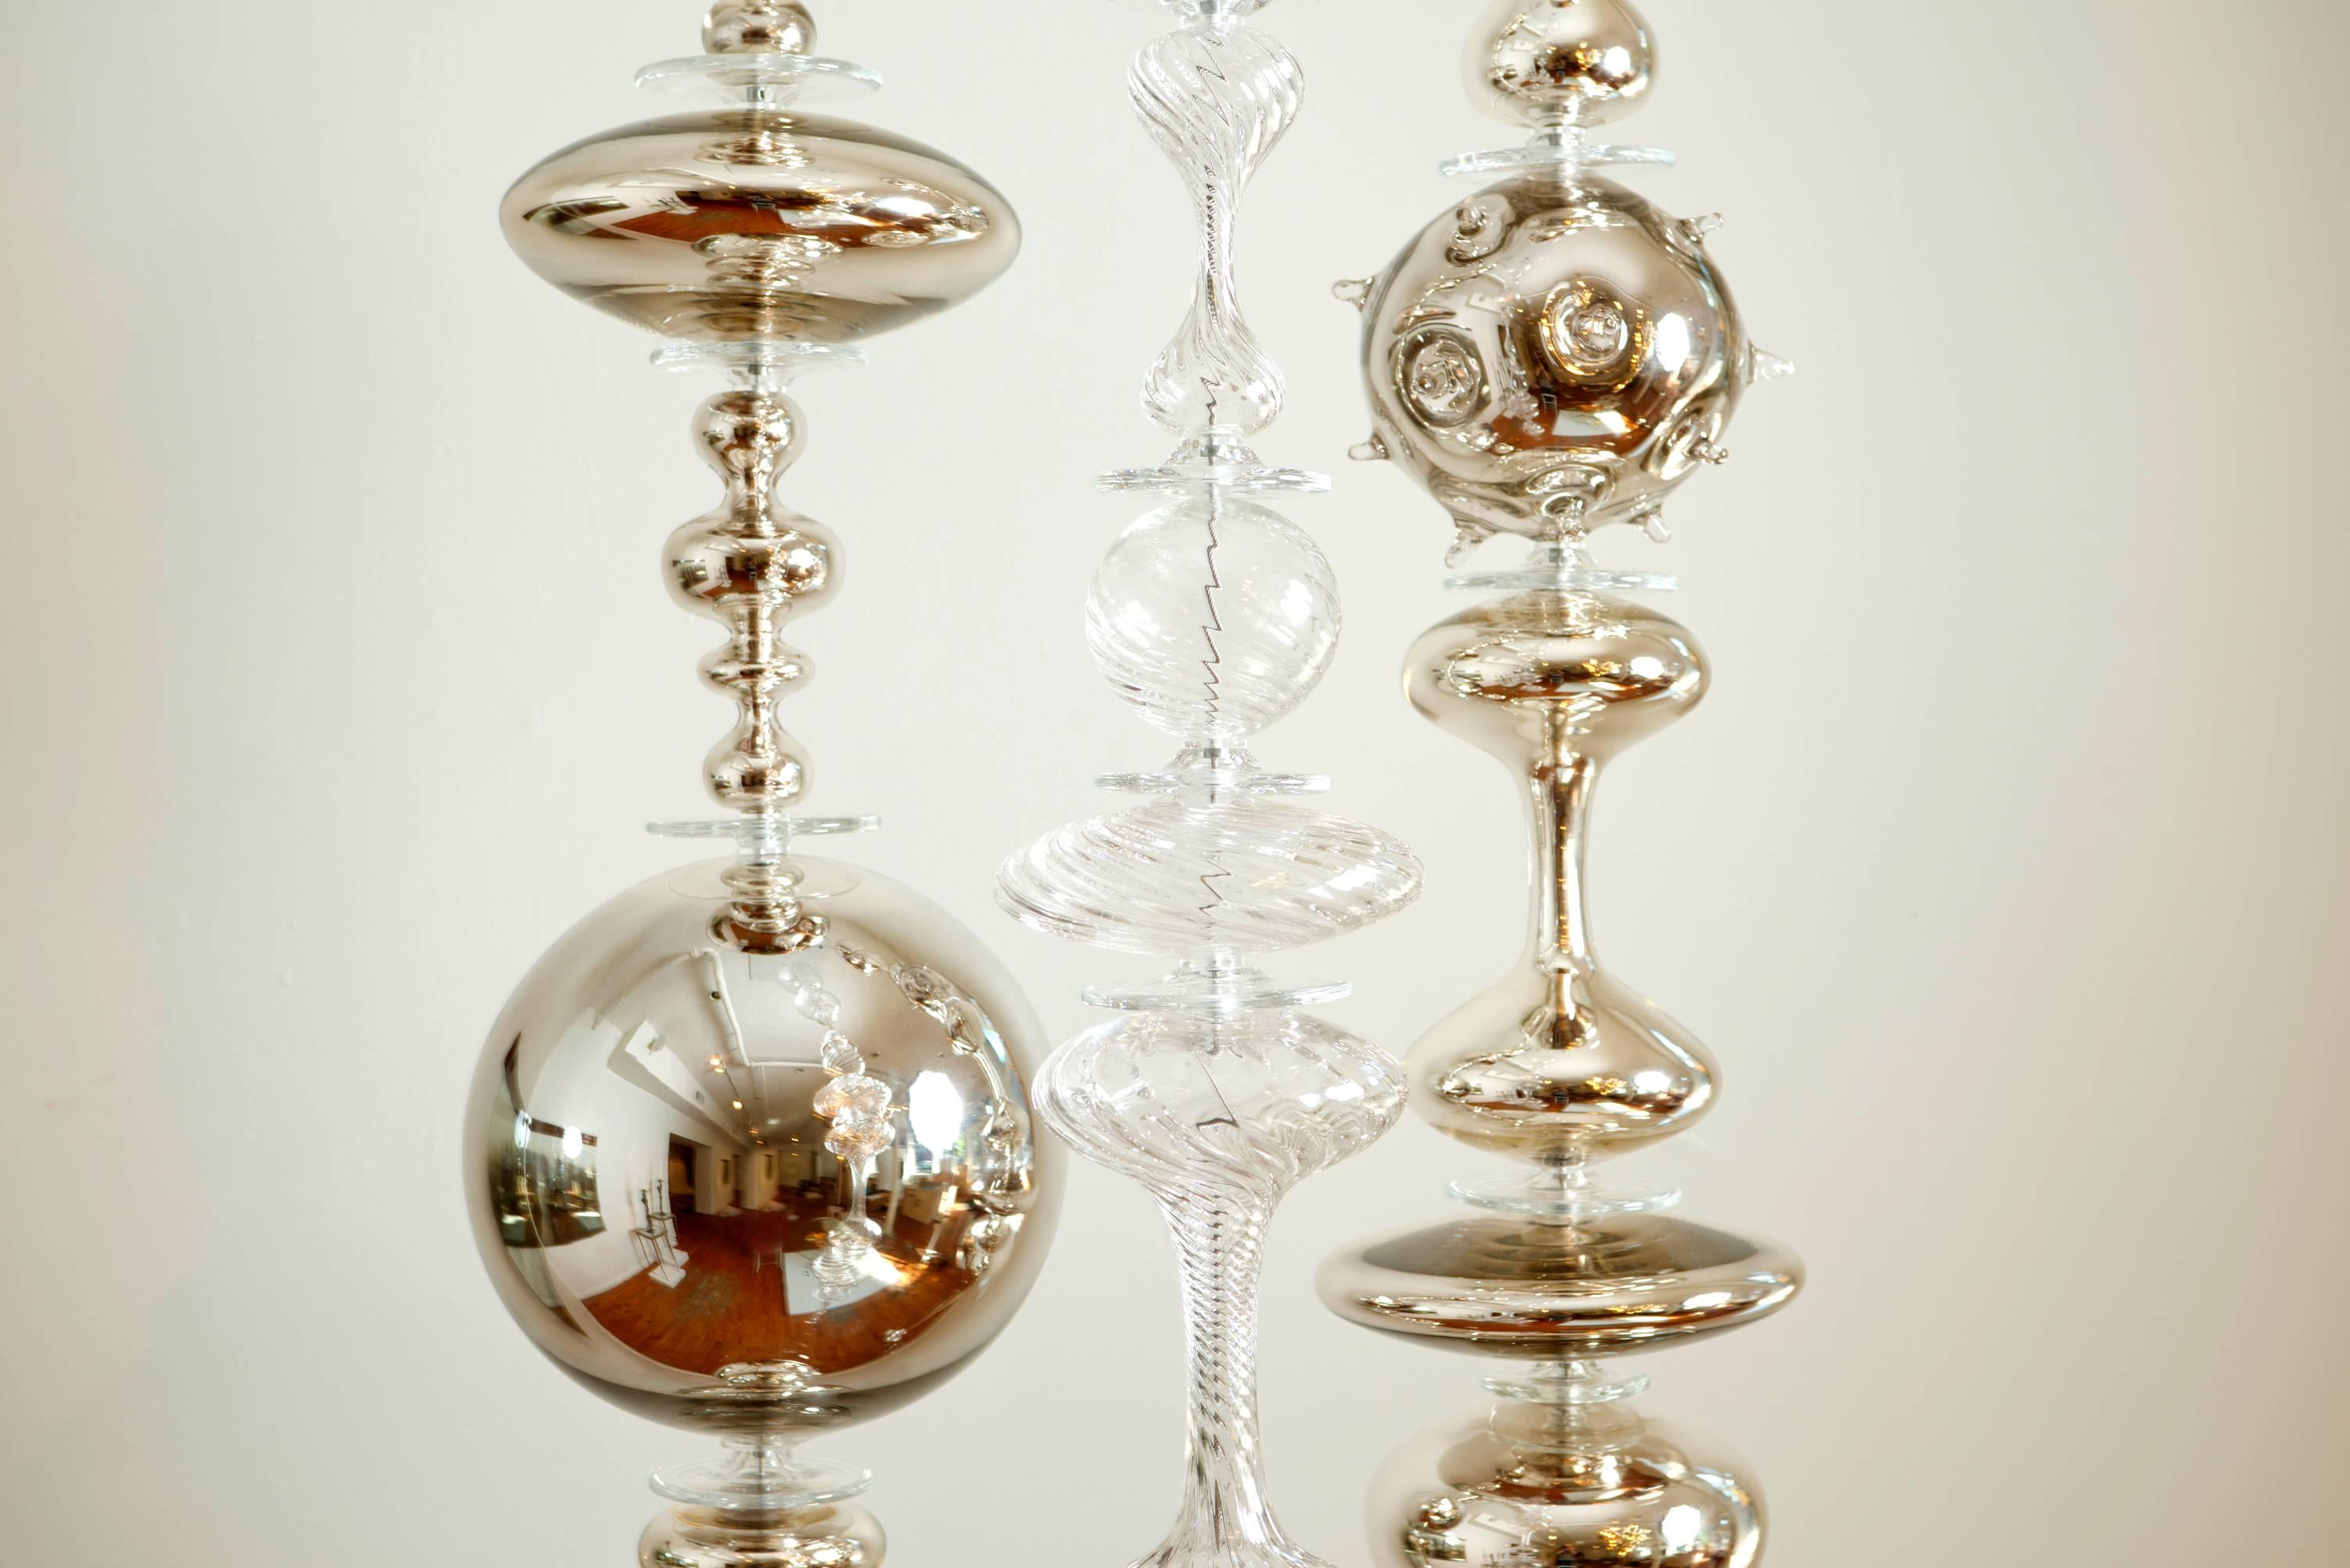 Three magnificent strands of blown, sculpted and cold worked glass elements. Each piece is handmade uniquely by the artist, Andy Paiko. Andy is a recipient of the 2015 Louis Comfort Tiffany grant, a prestigious award given to a select group of